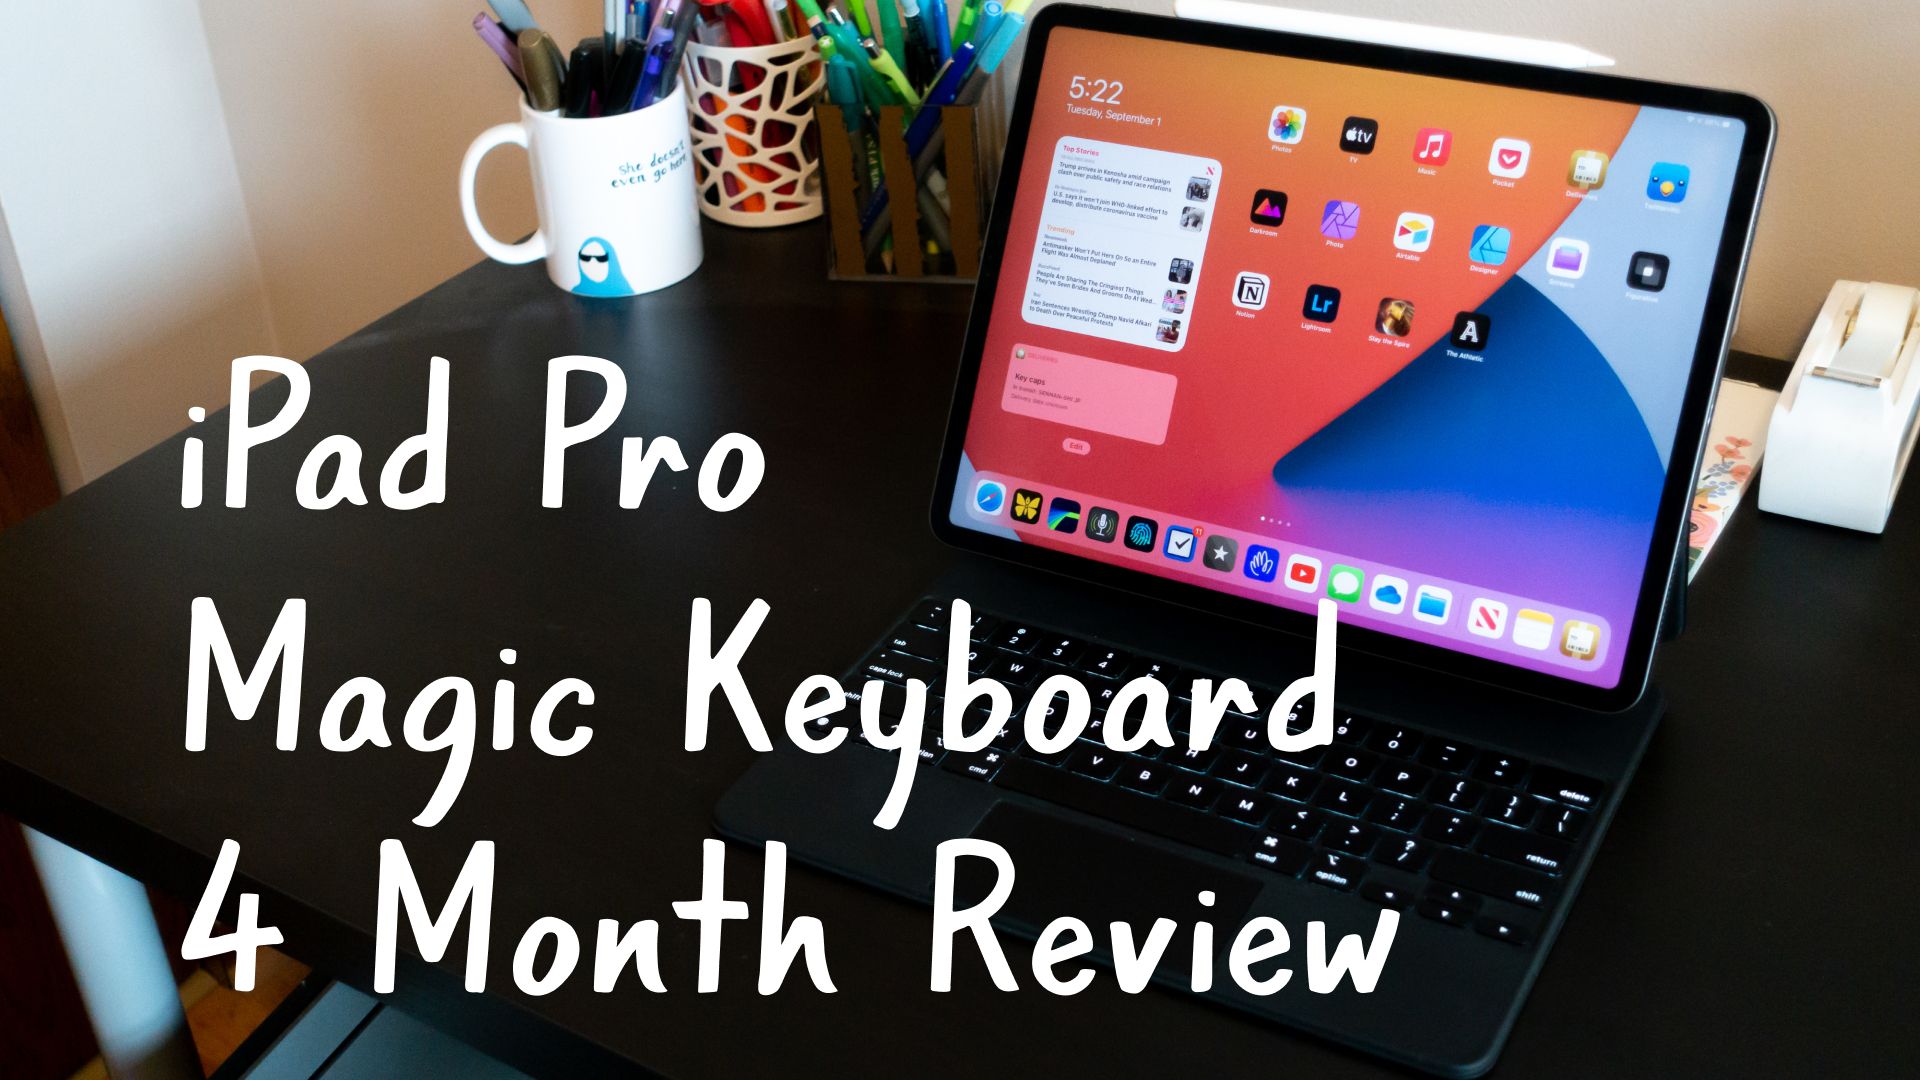 iPad Pro Magic Keyboard 4 Month Video Review